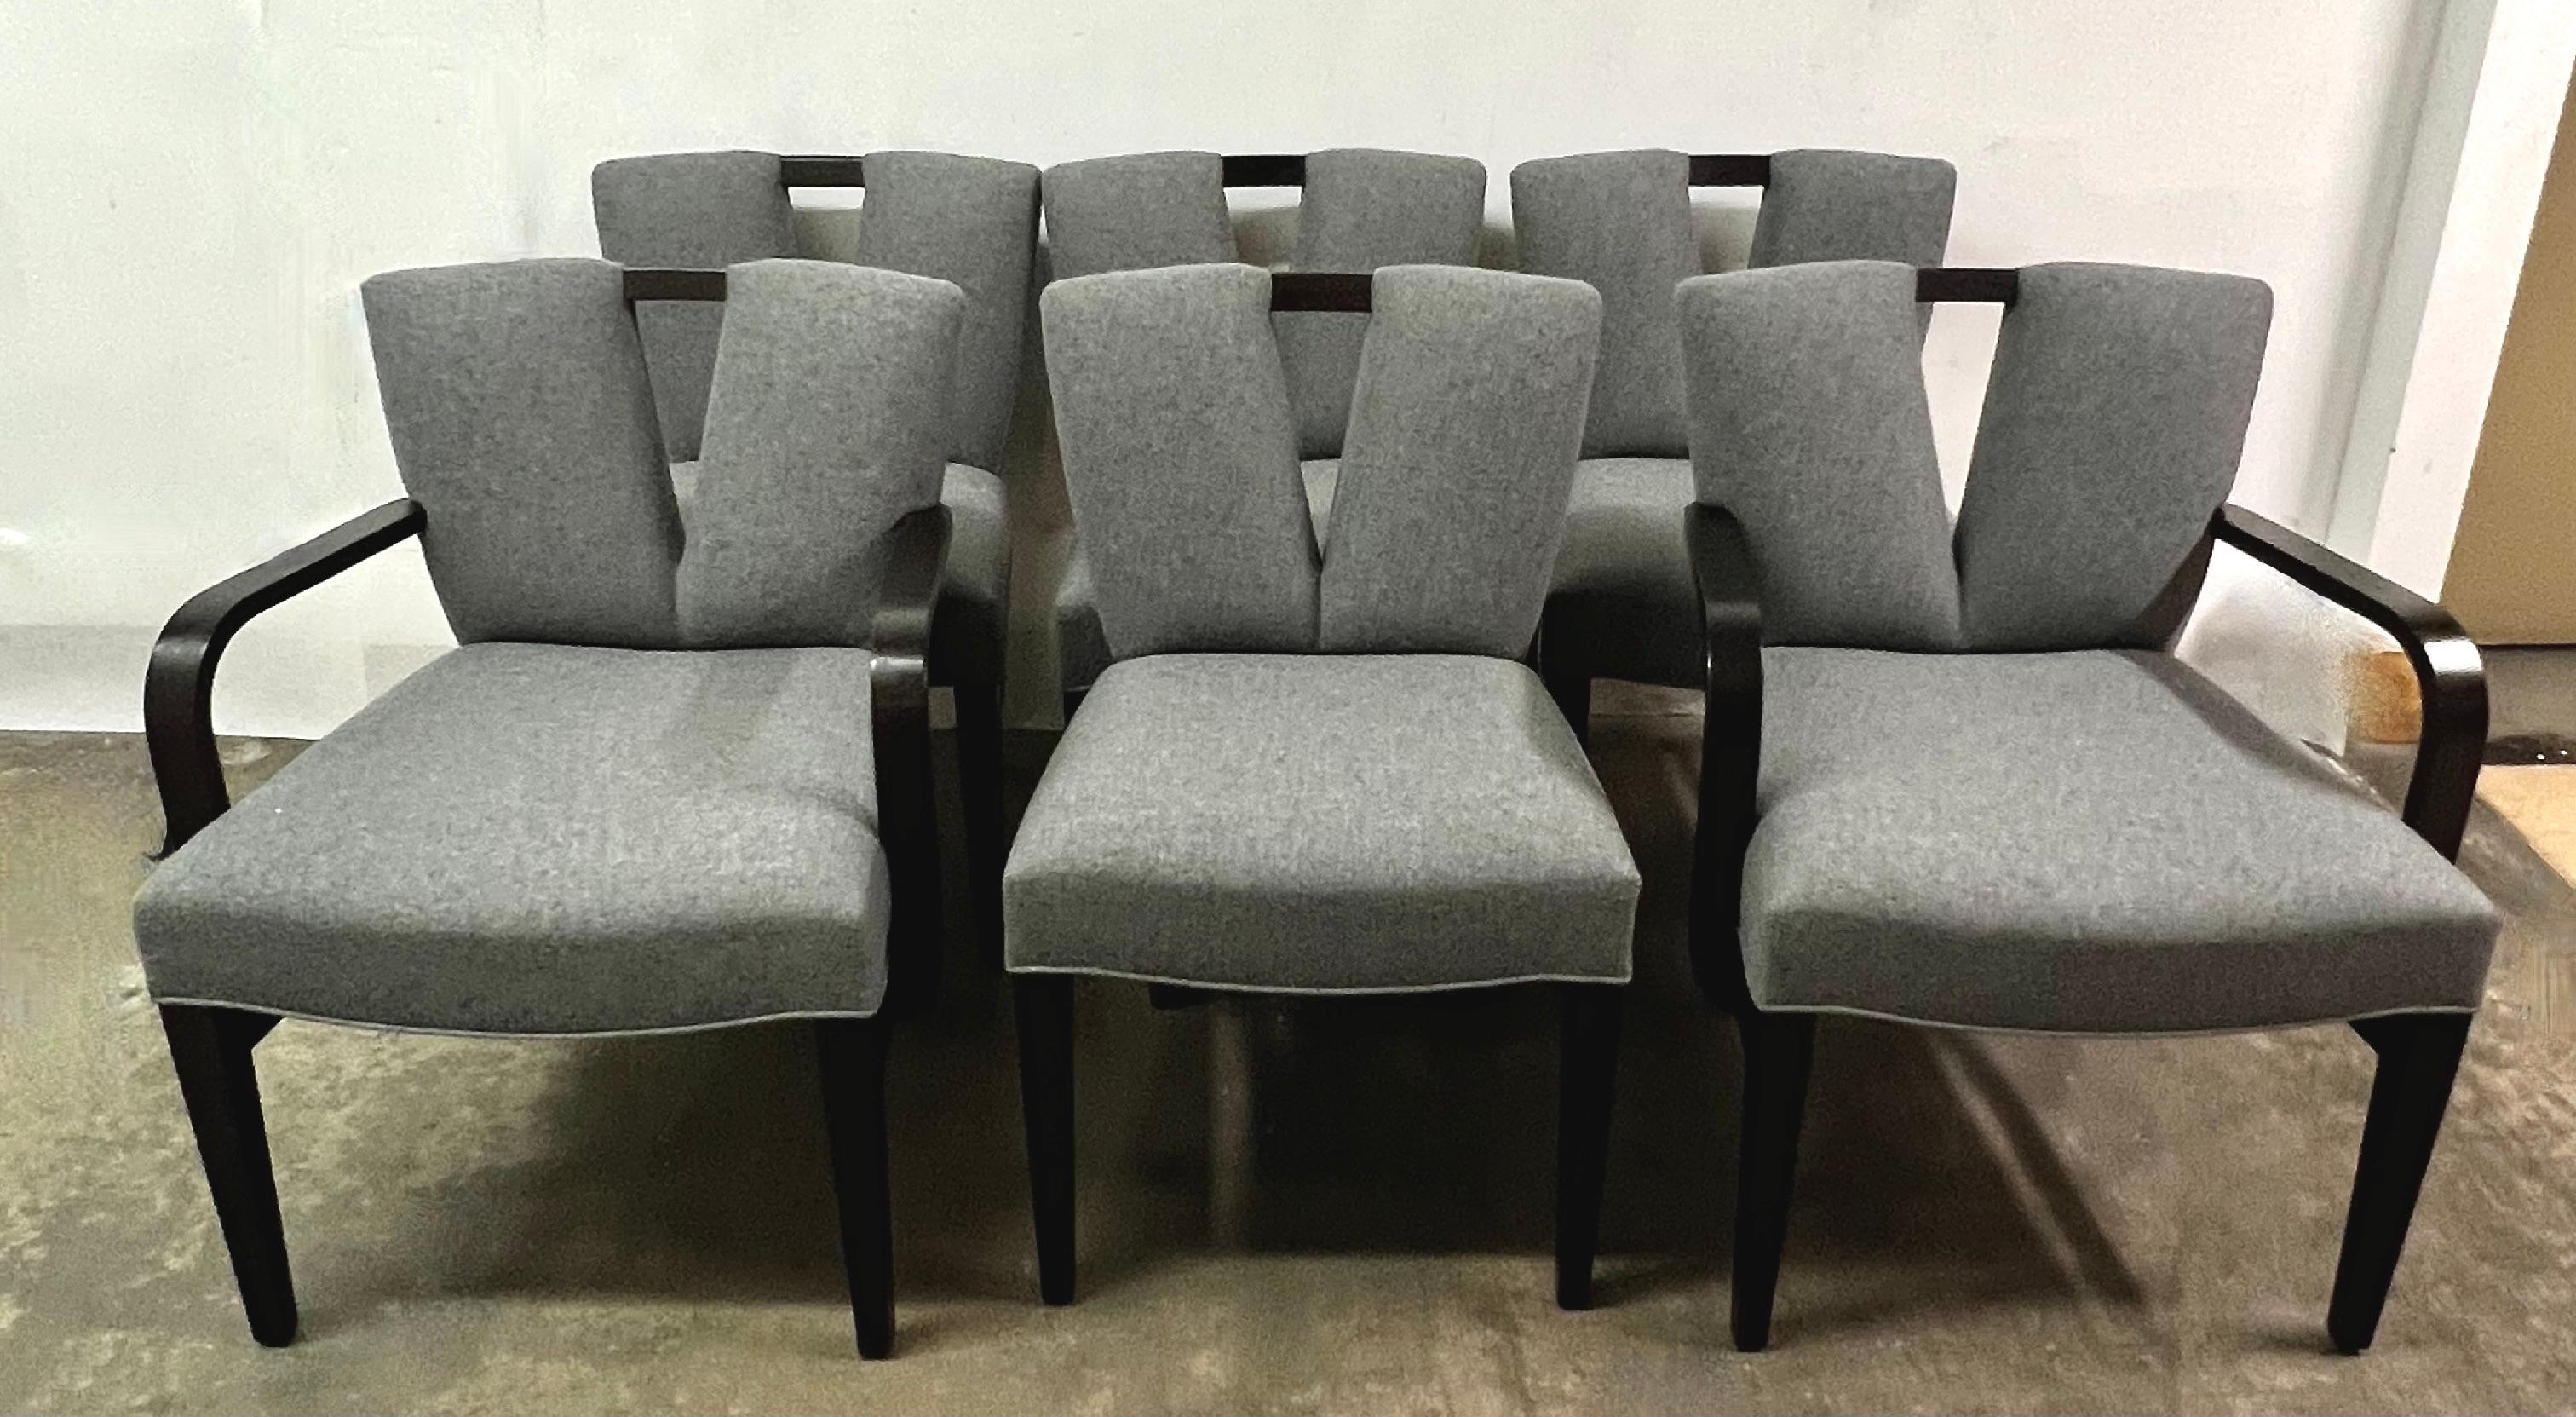 North American Six Corset Dining Chairs by Paul Frankl in Grey Wool For Sale